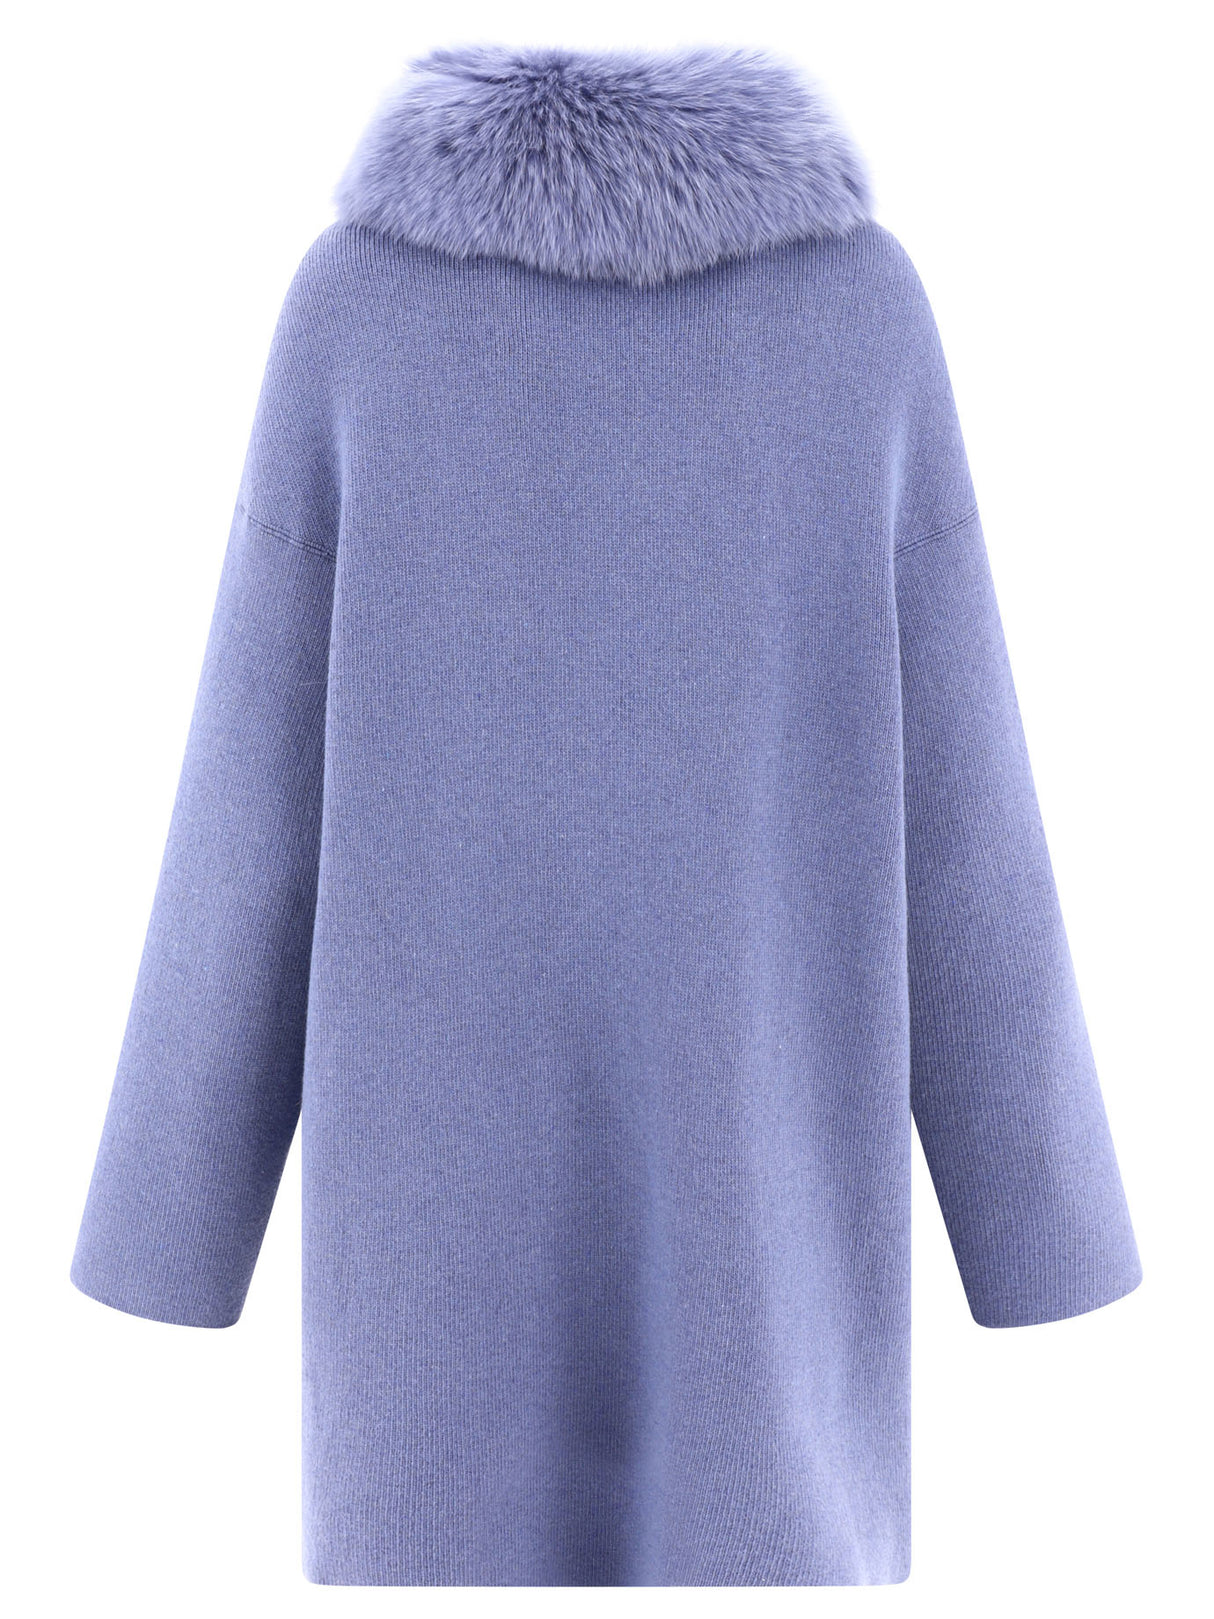 GIOVI Luxurious Wool and Cashmere Jacket in Light Blue for Women